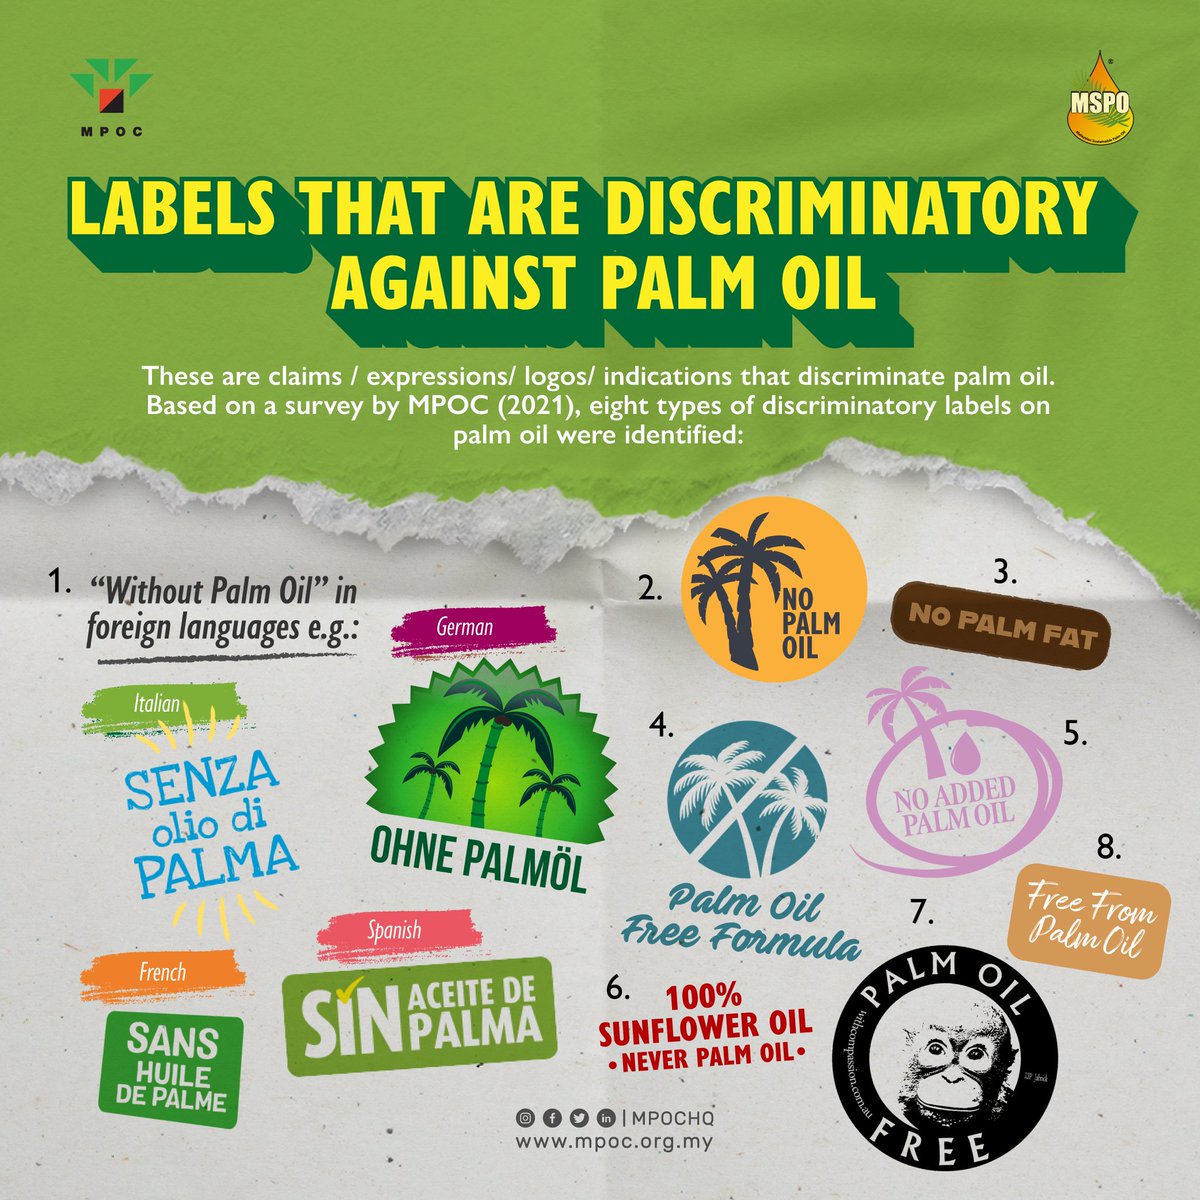 Labels that are discriminatory against palm oil: These are claims/expressions/logos/indications that discriminate against palm oil. Based on a survey by MPOC, 8 types of discriminatory labels on palm oil were identified. #MalaysianPalmOil #MSPO #sustainability #mampan